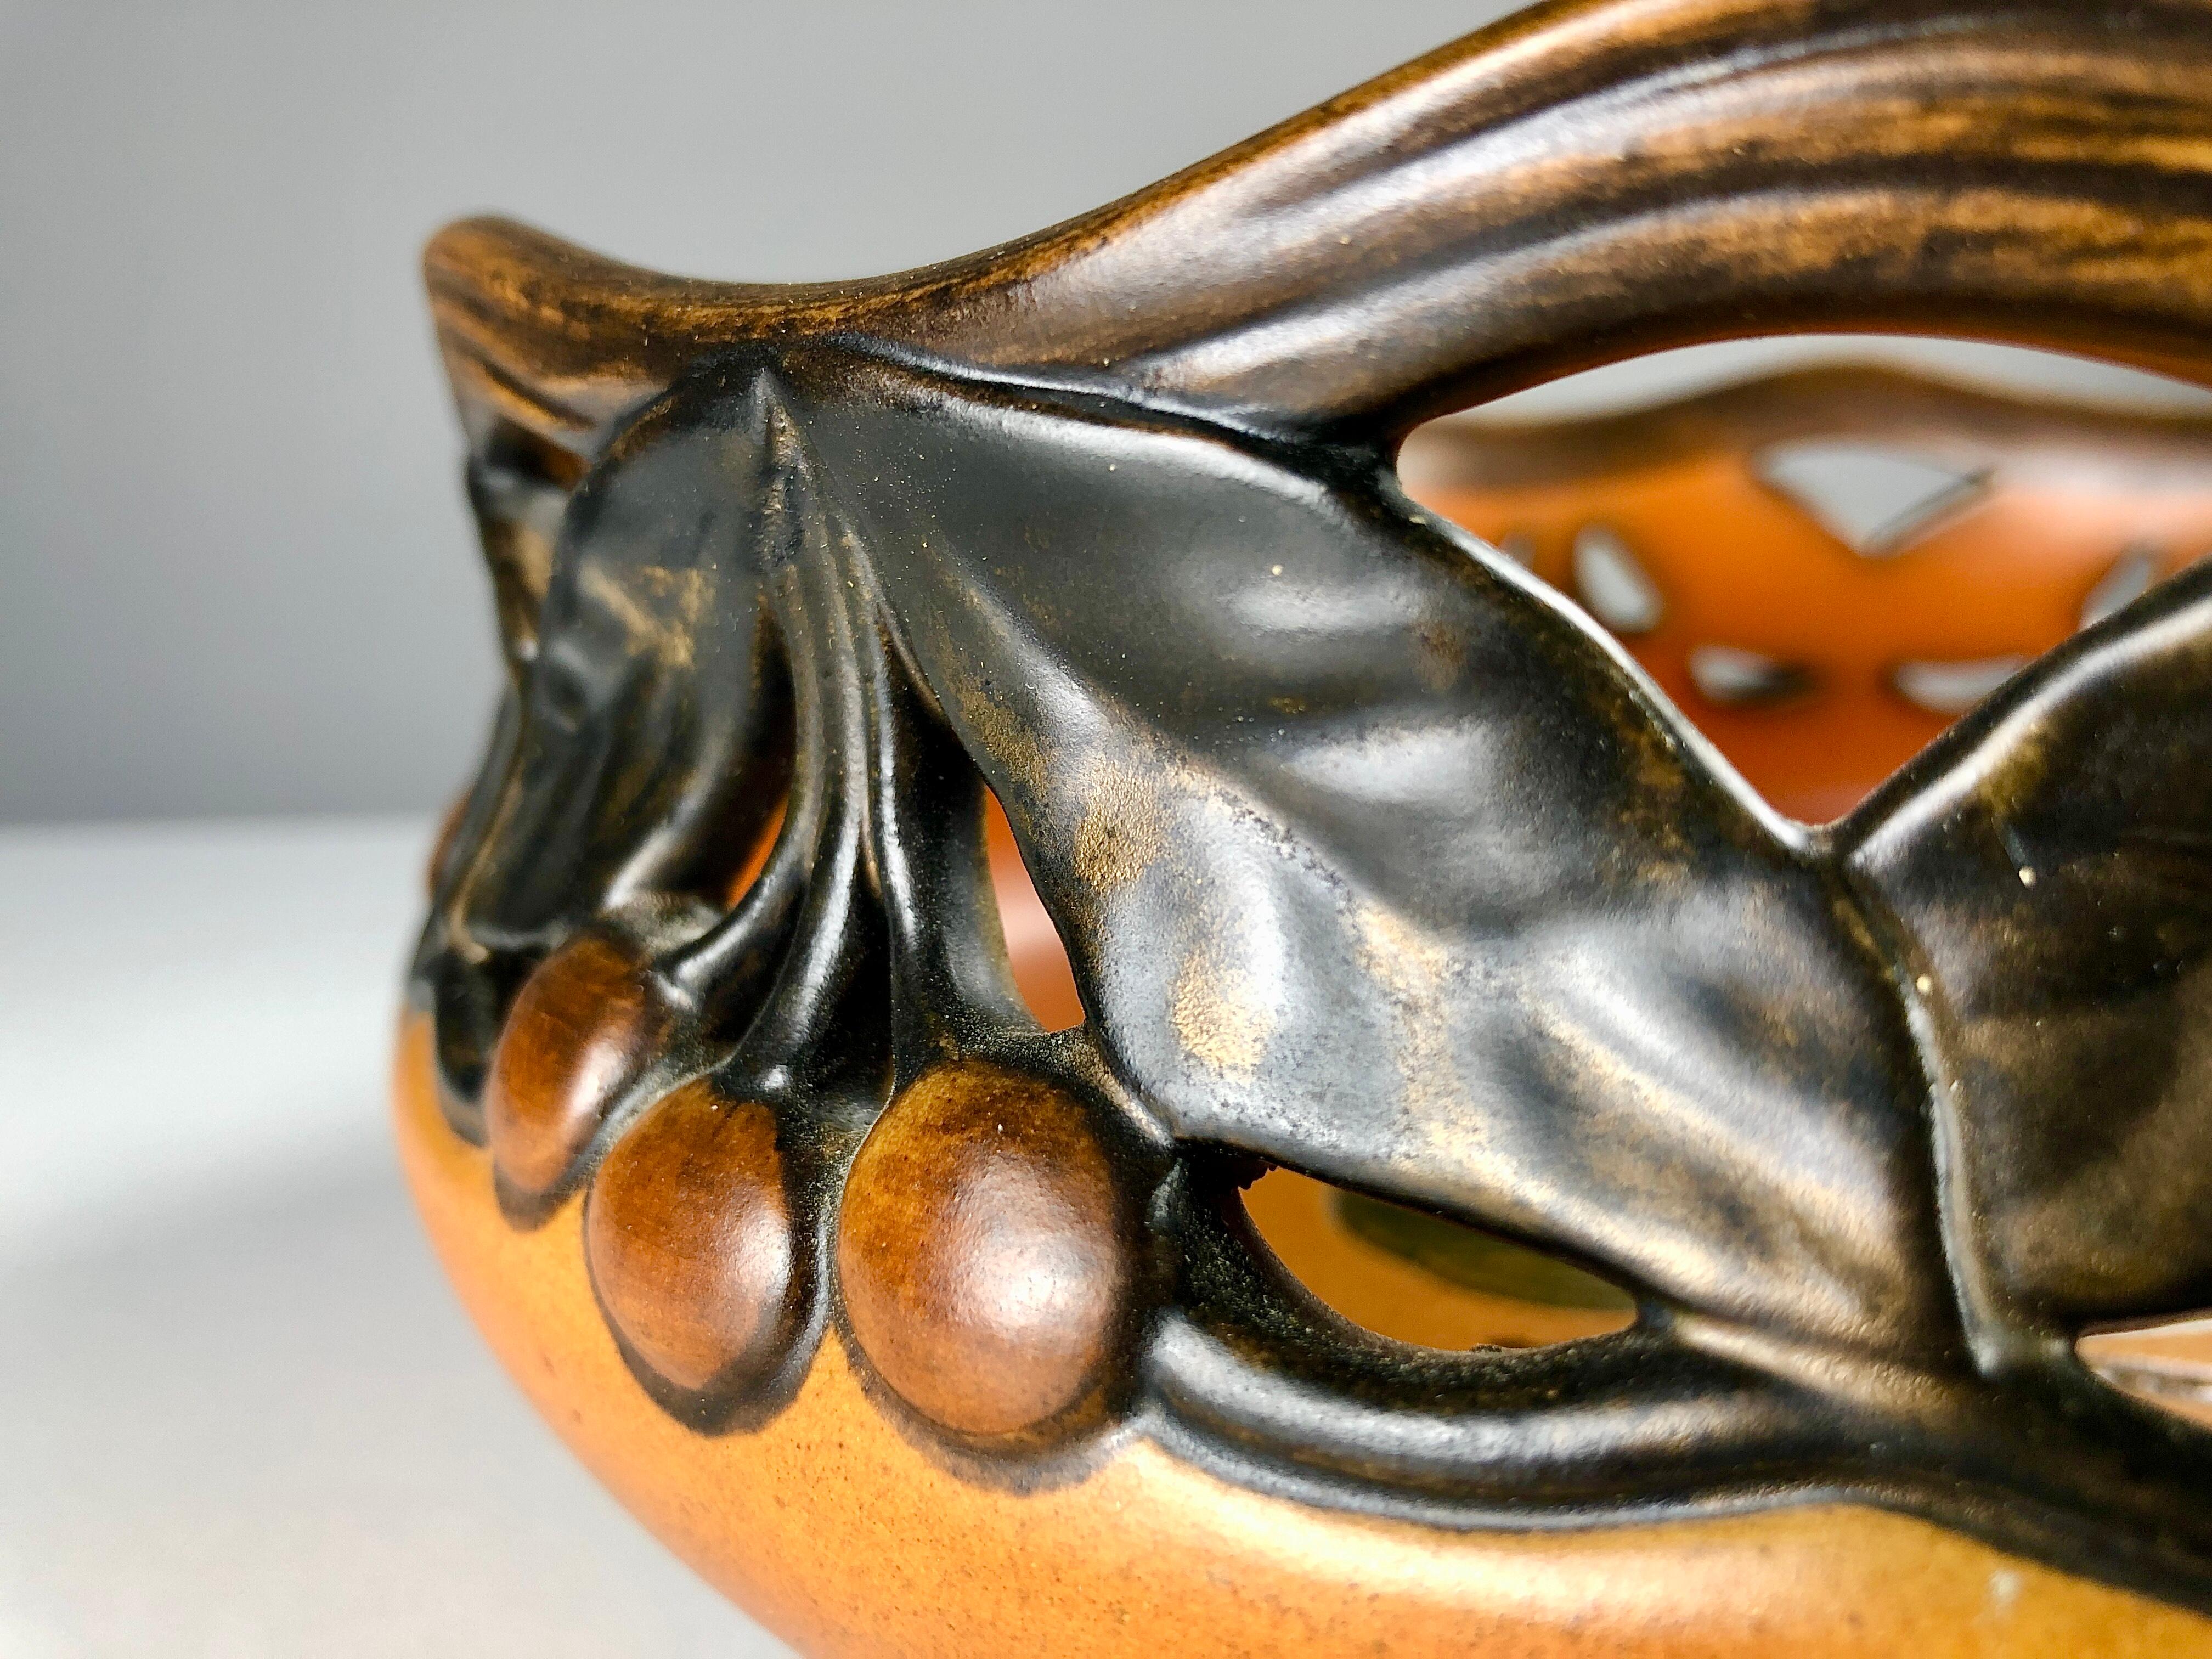 1900's Hand-crafted Danish Art Nouveau Cherry Decorated Bowl by P. Ipsens Enke In Good Condition For Sale In Knebel, DK